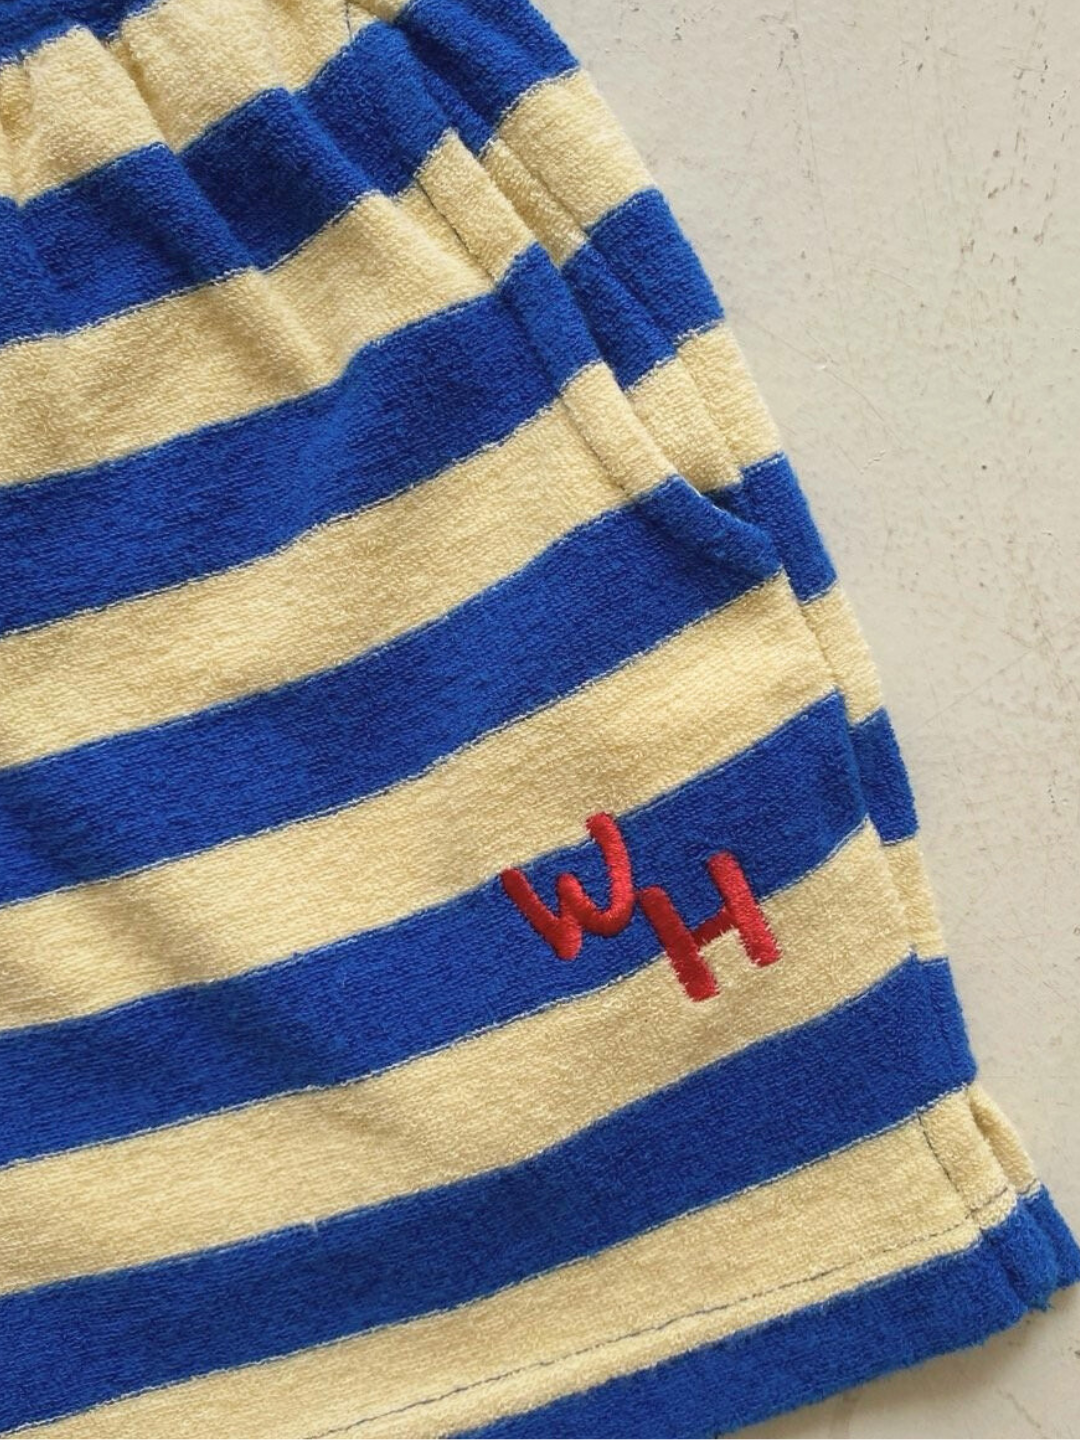 Red WH embroidered logo on blue/yellow riviera shorts